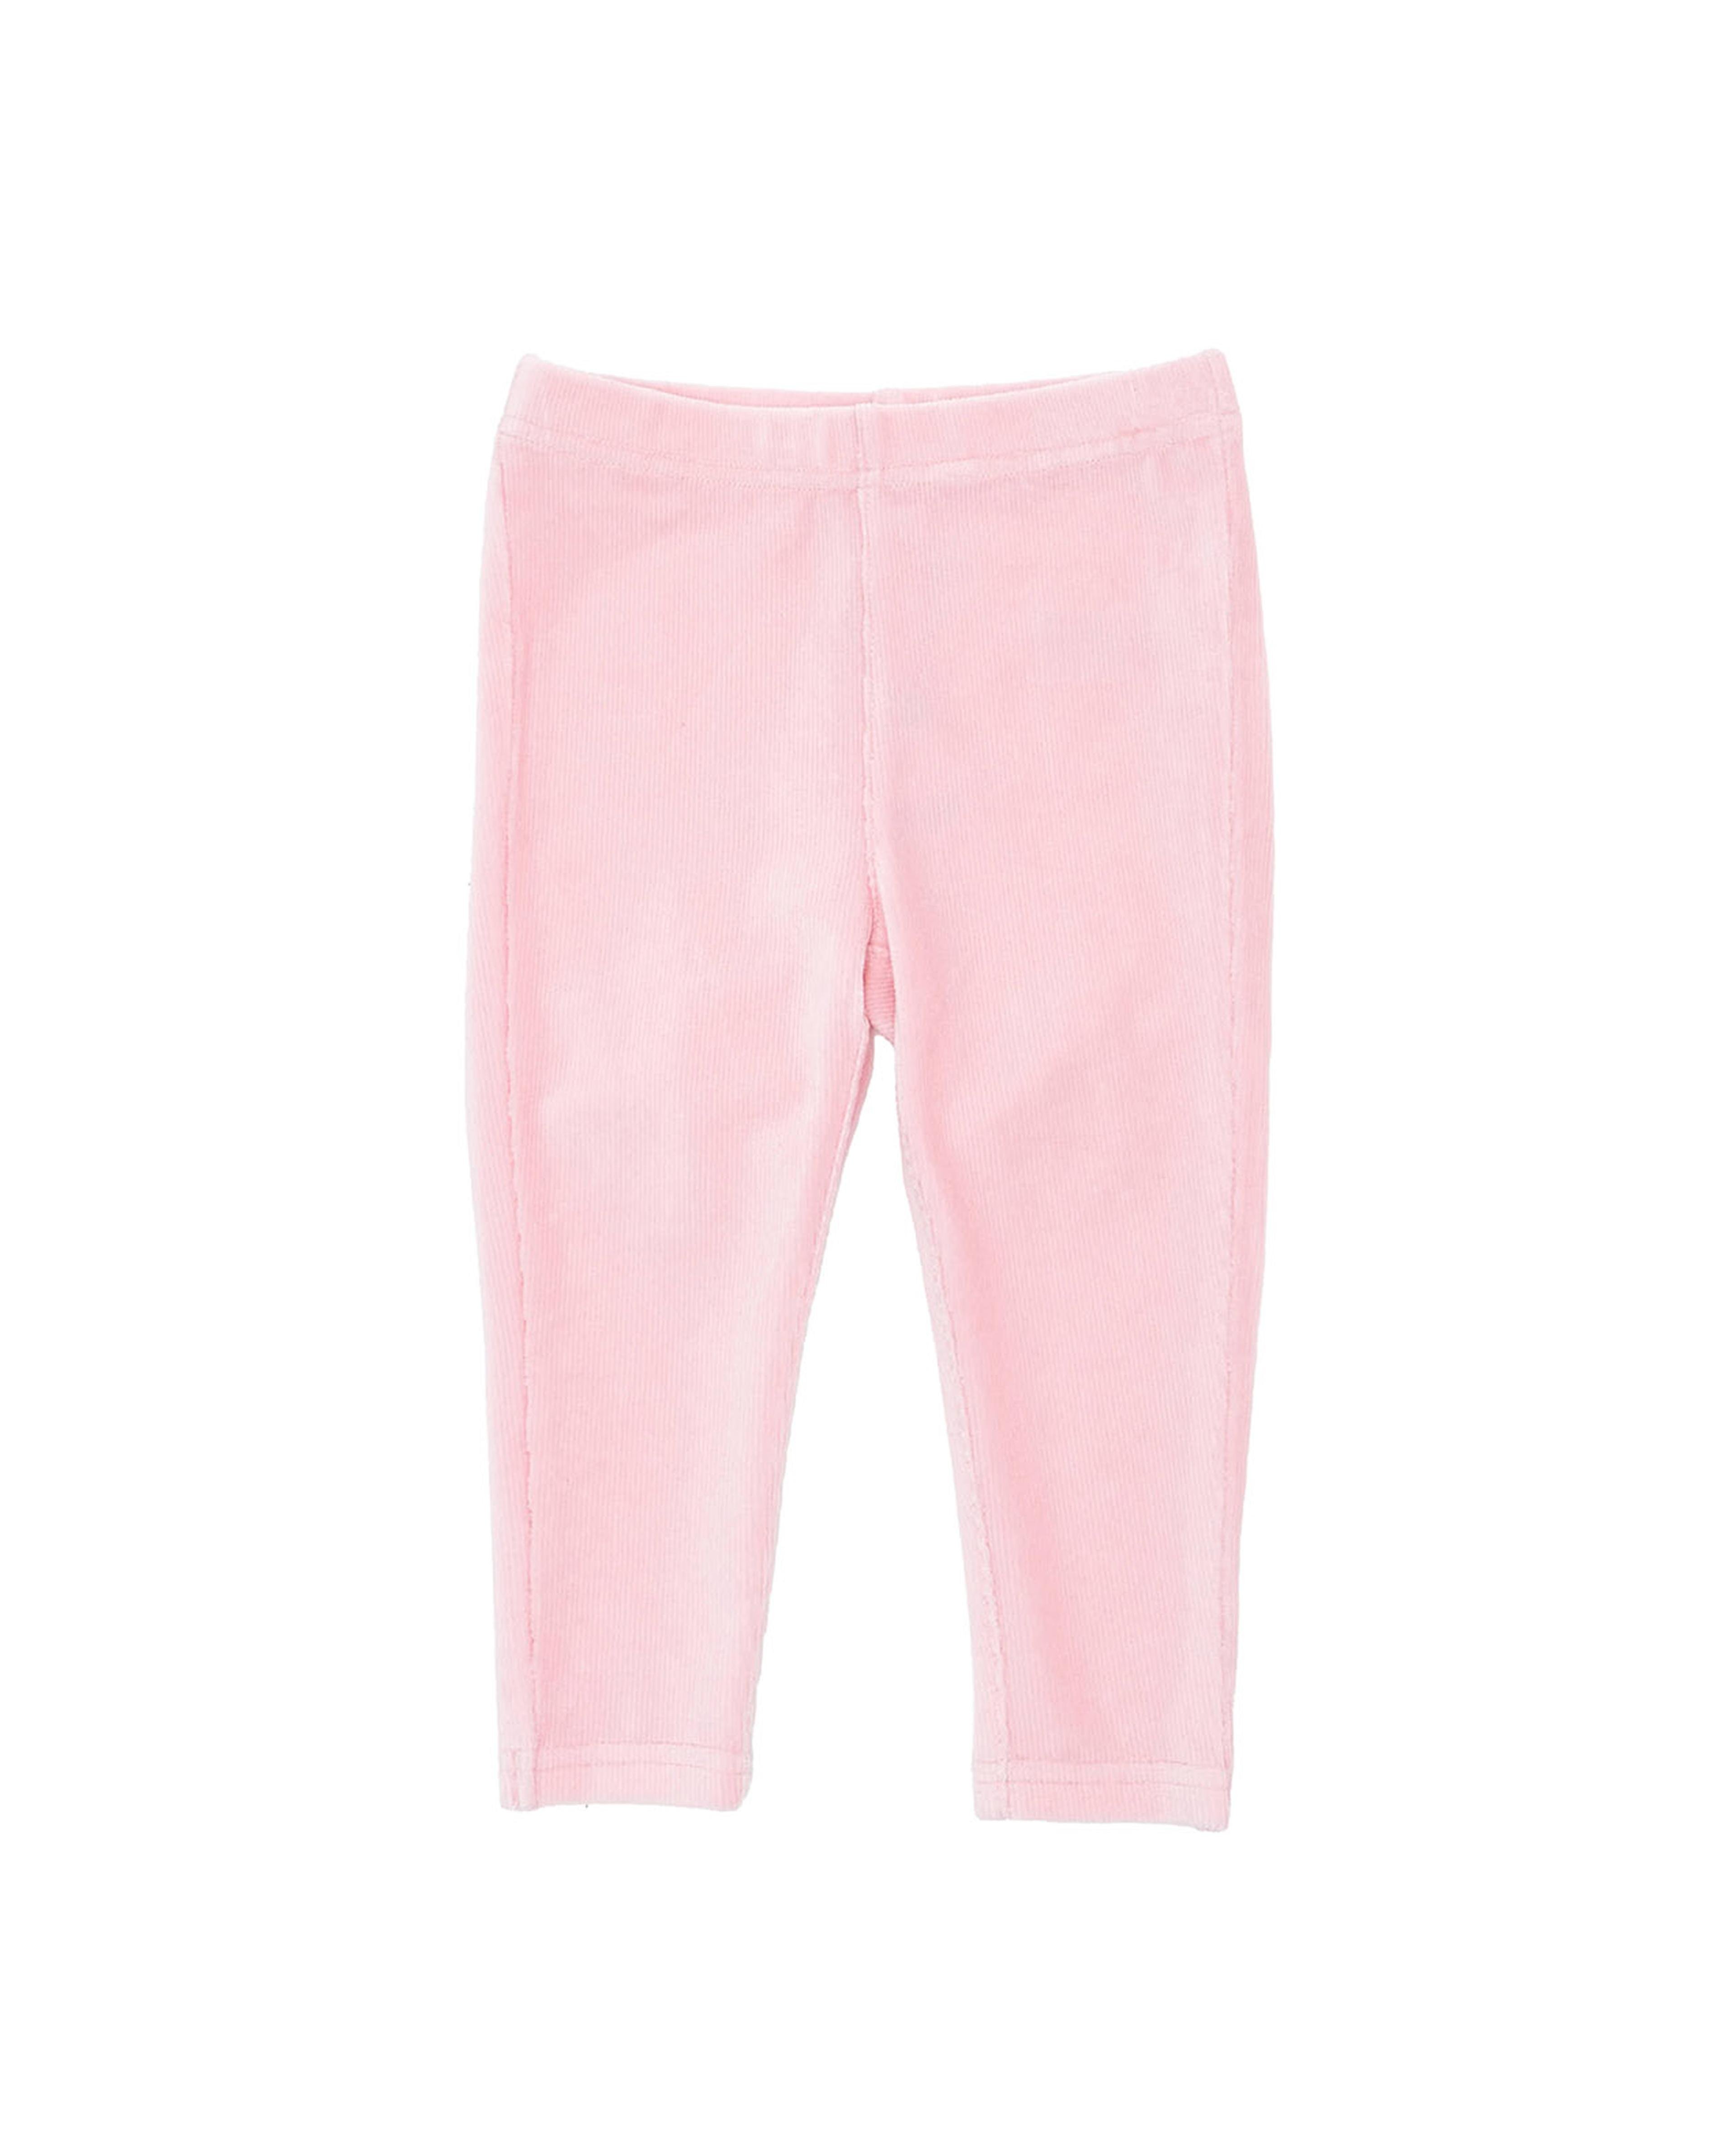 Solid Knitted Pants with Elastic Waist